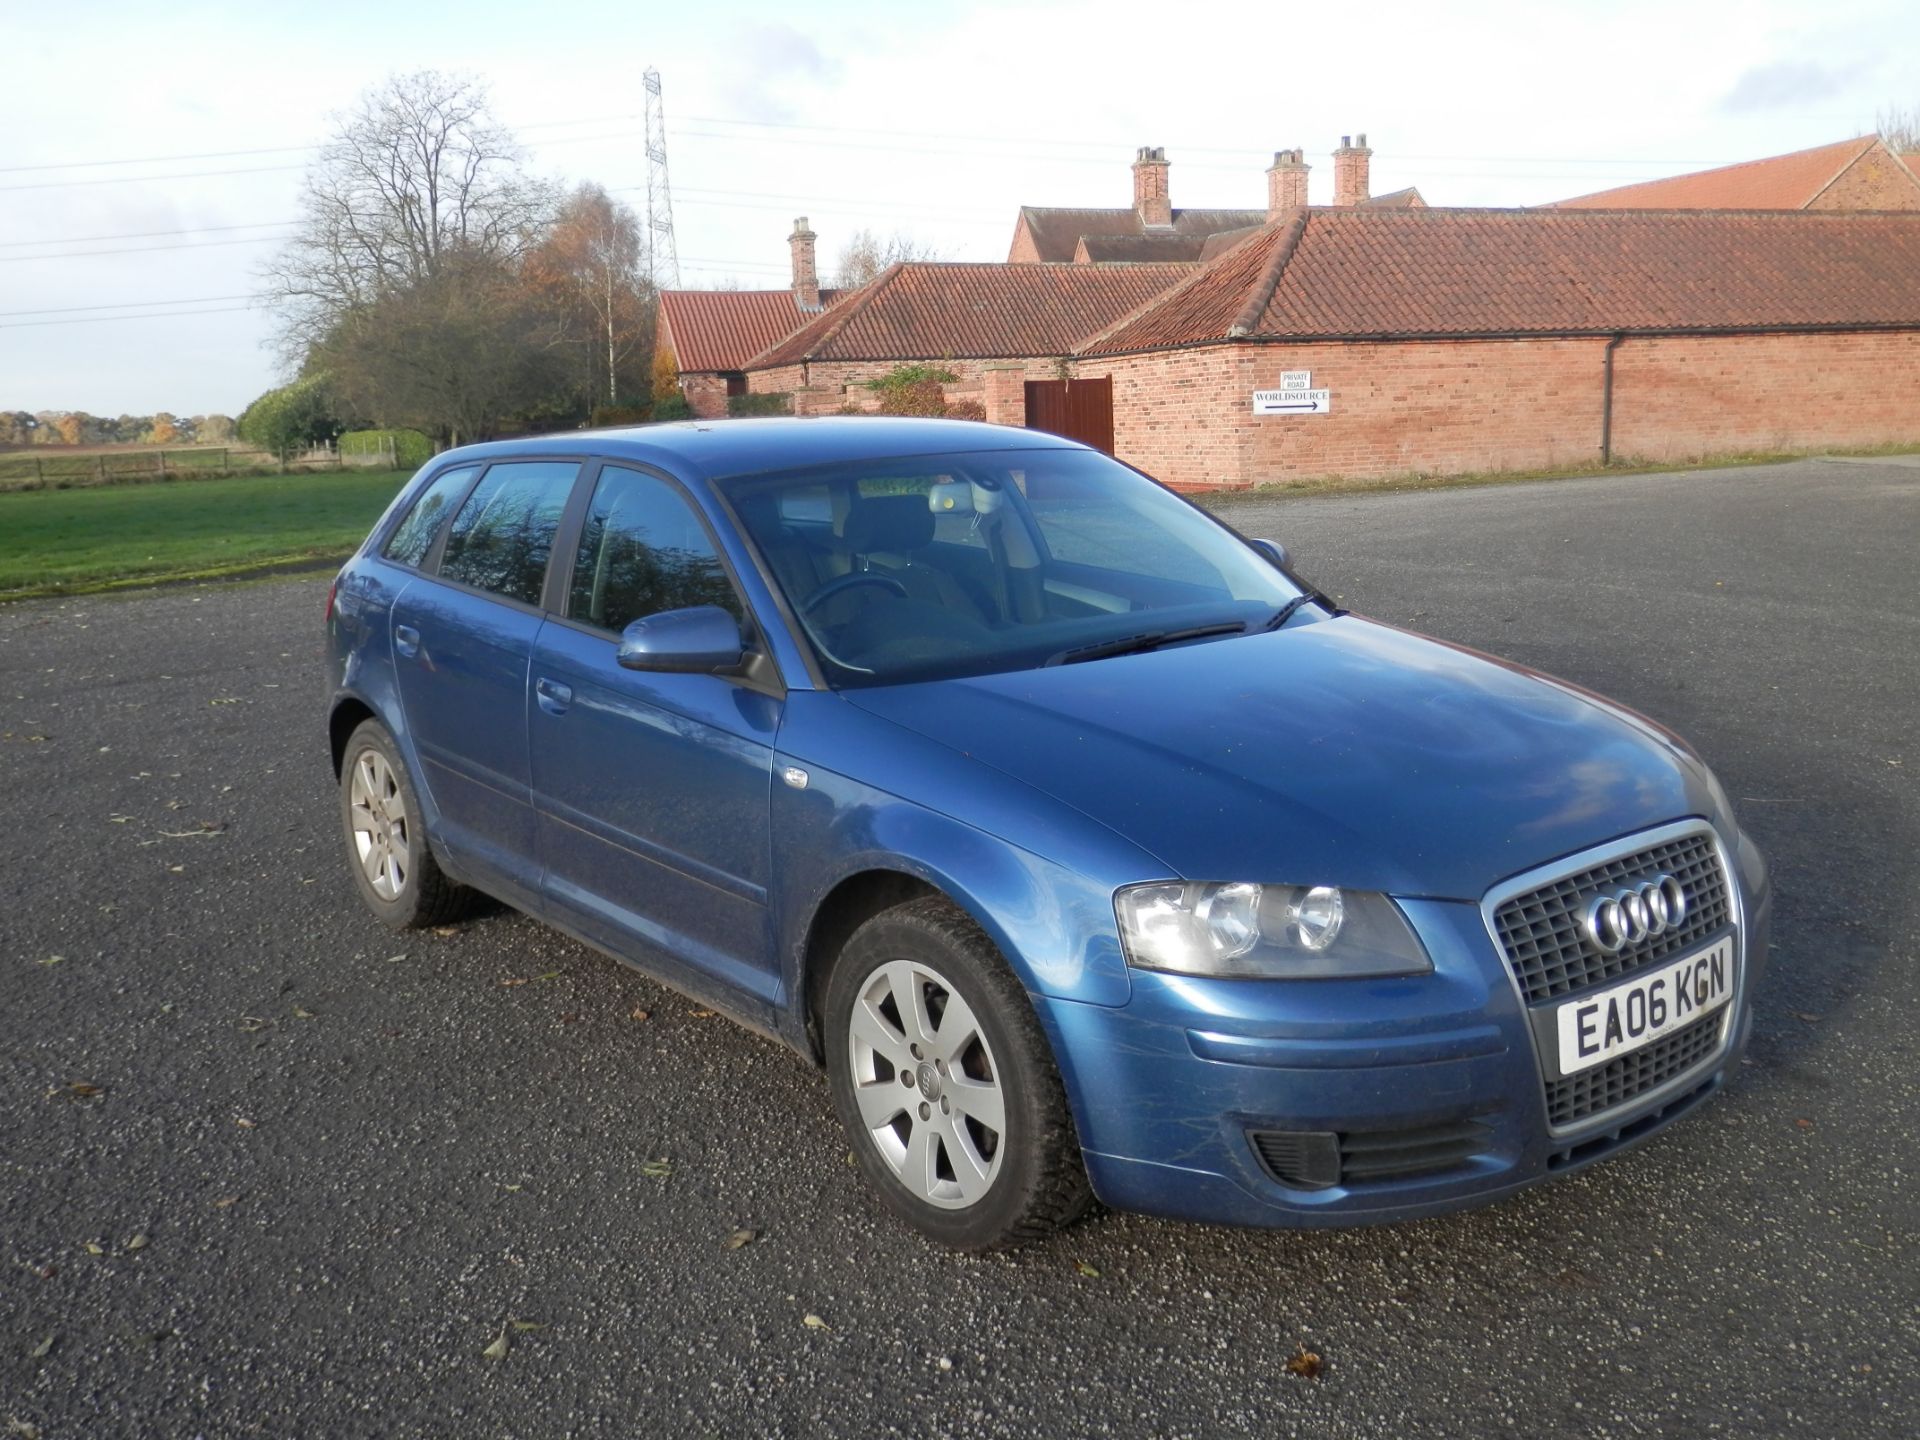 2006/06 AUDI A3 1.9 TDI, MOTFEB 2018, 170K MILES, HPI CLEAR. DRIVES VERY WELL. - Image 2 of 19